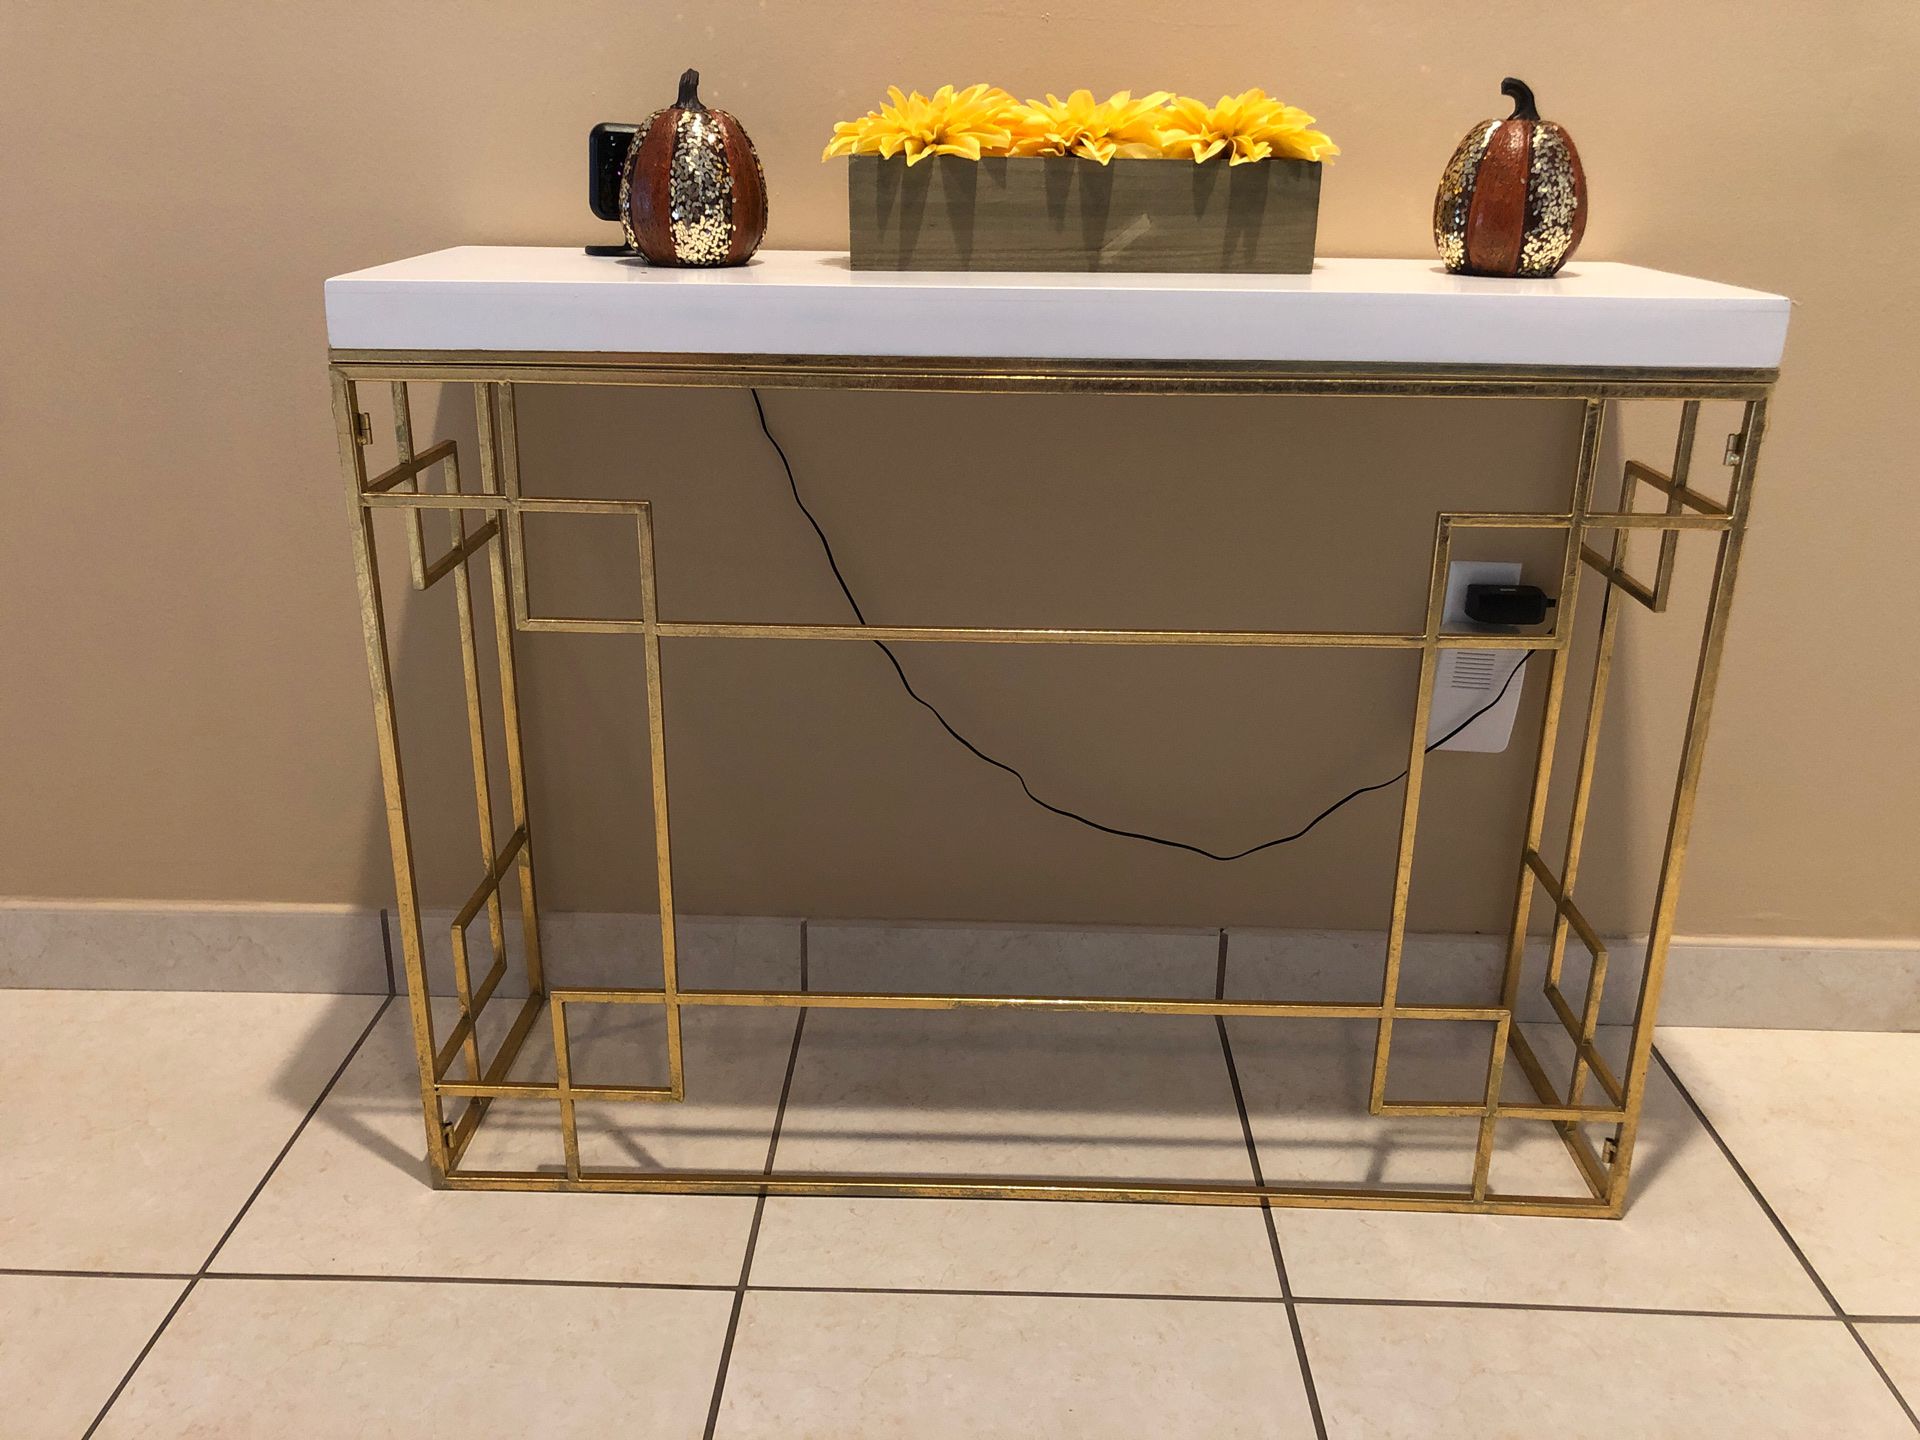 Small entry/console table